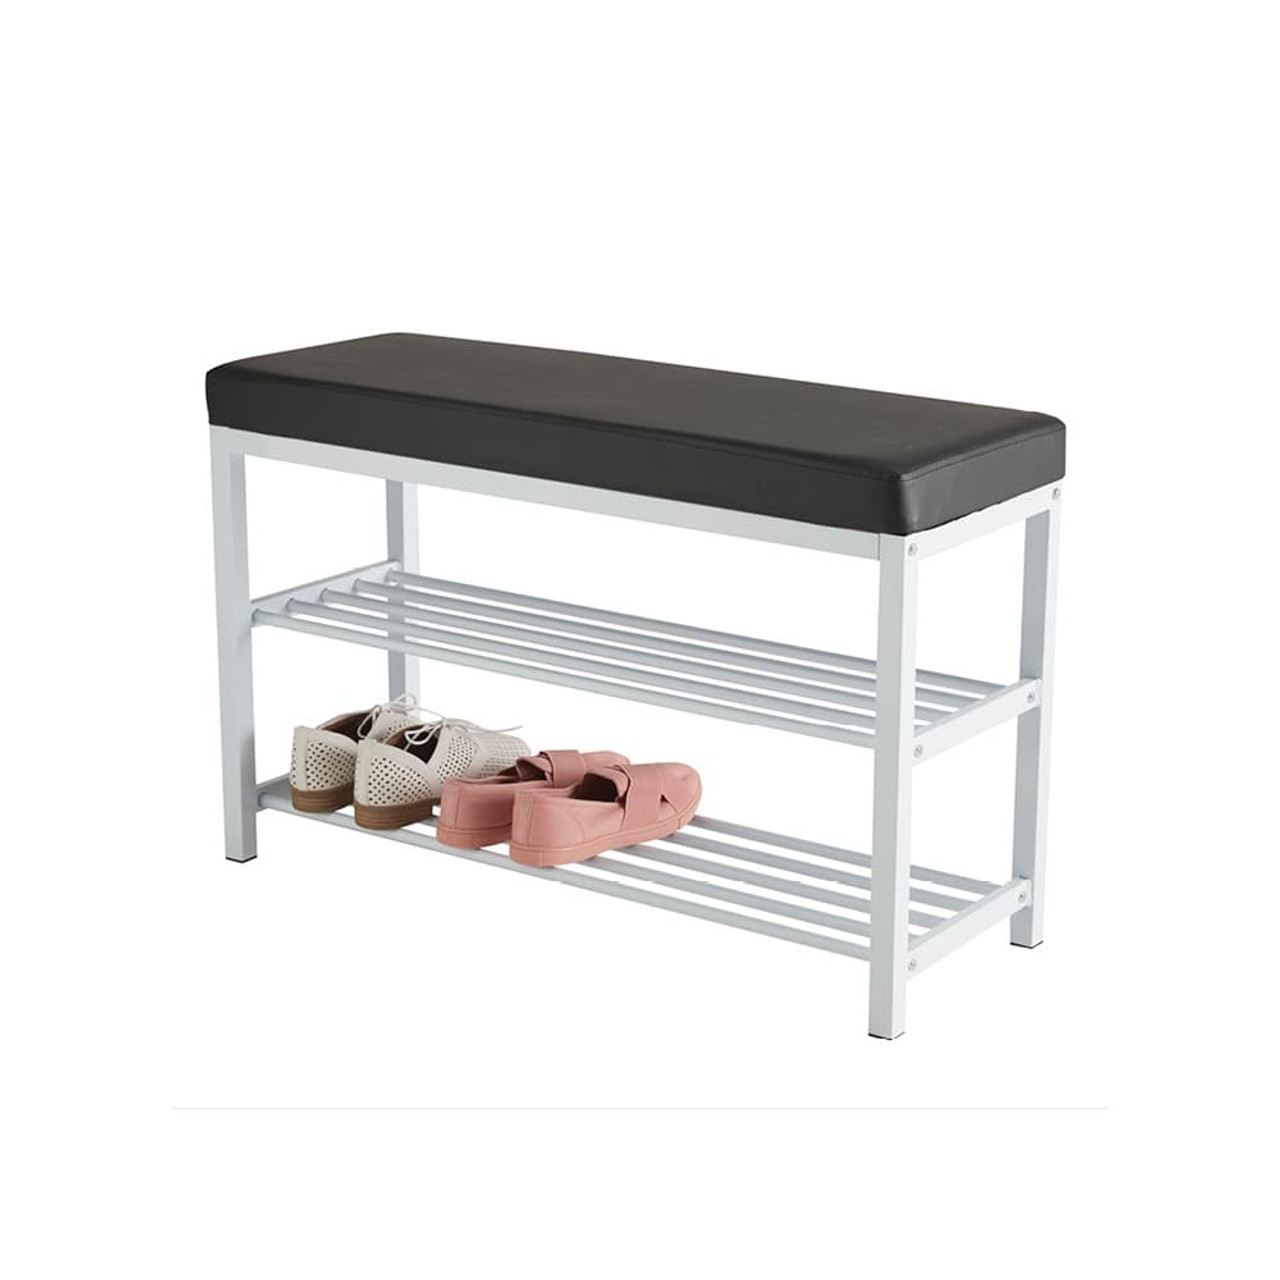 Howards 2 Tier Shoe Rack With Seat 